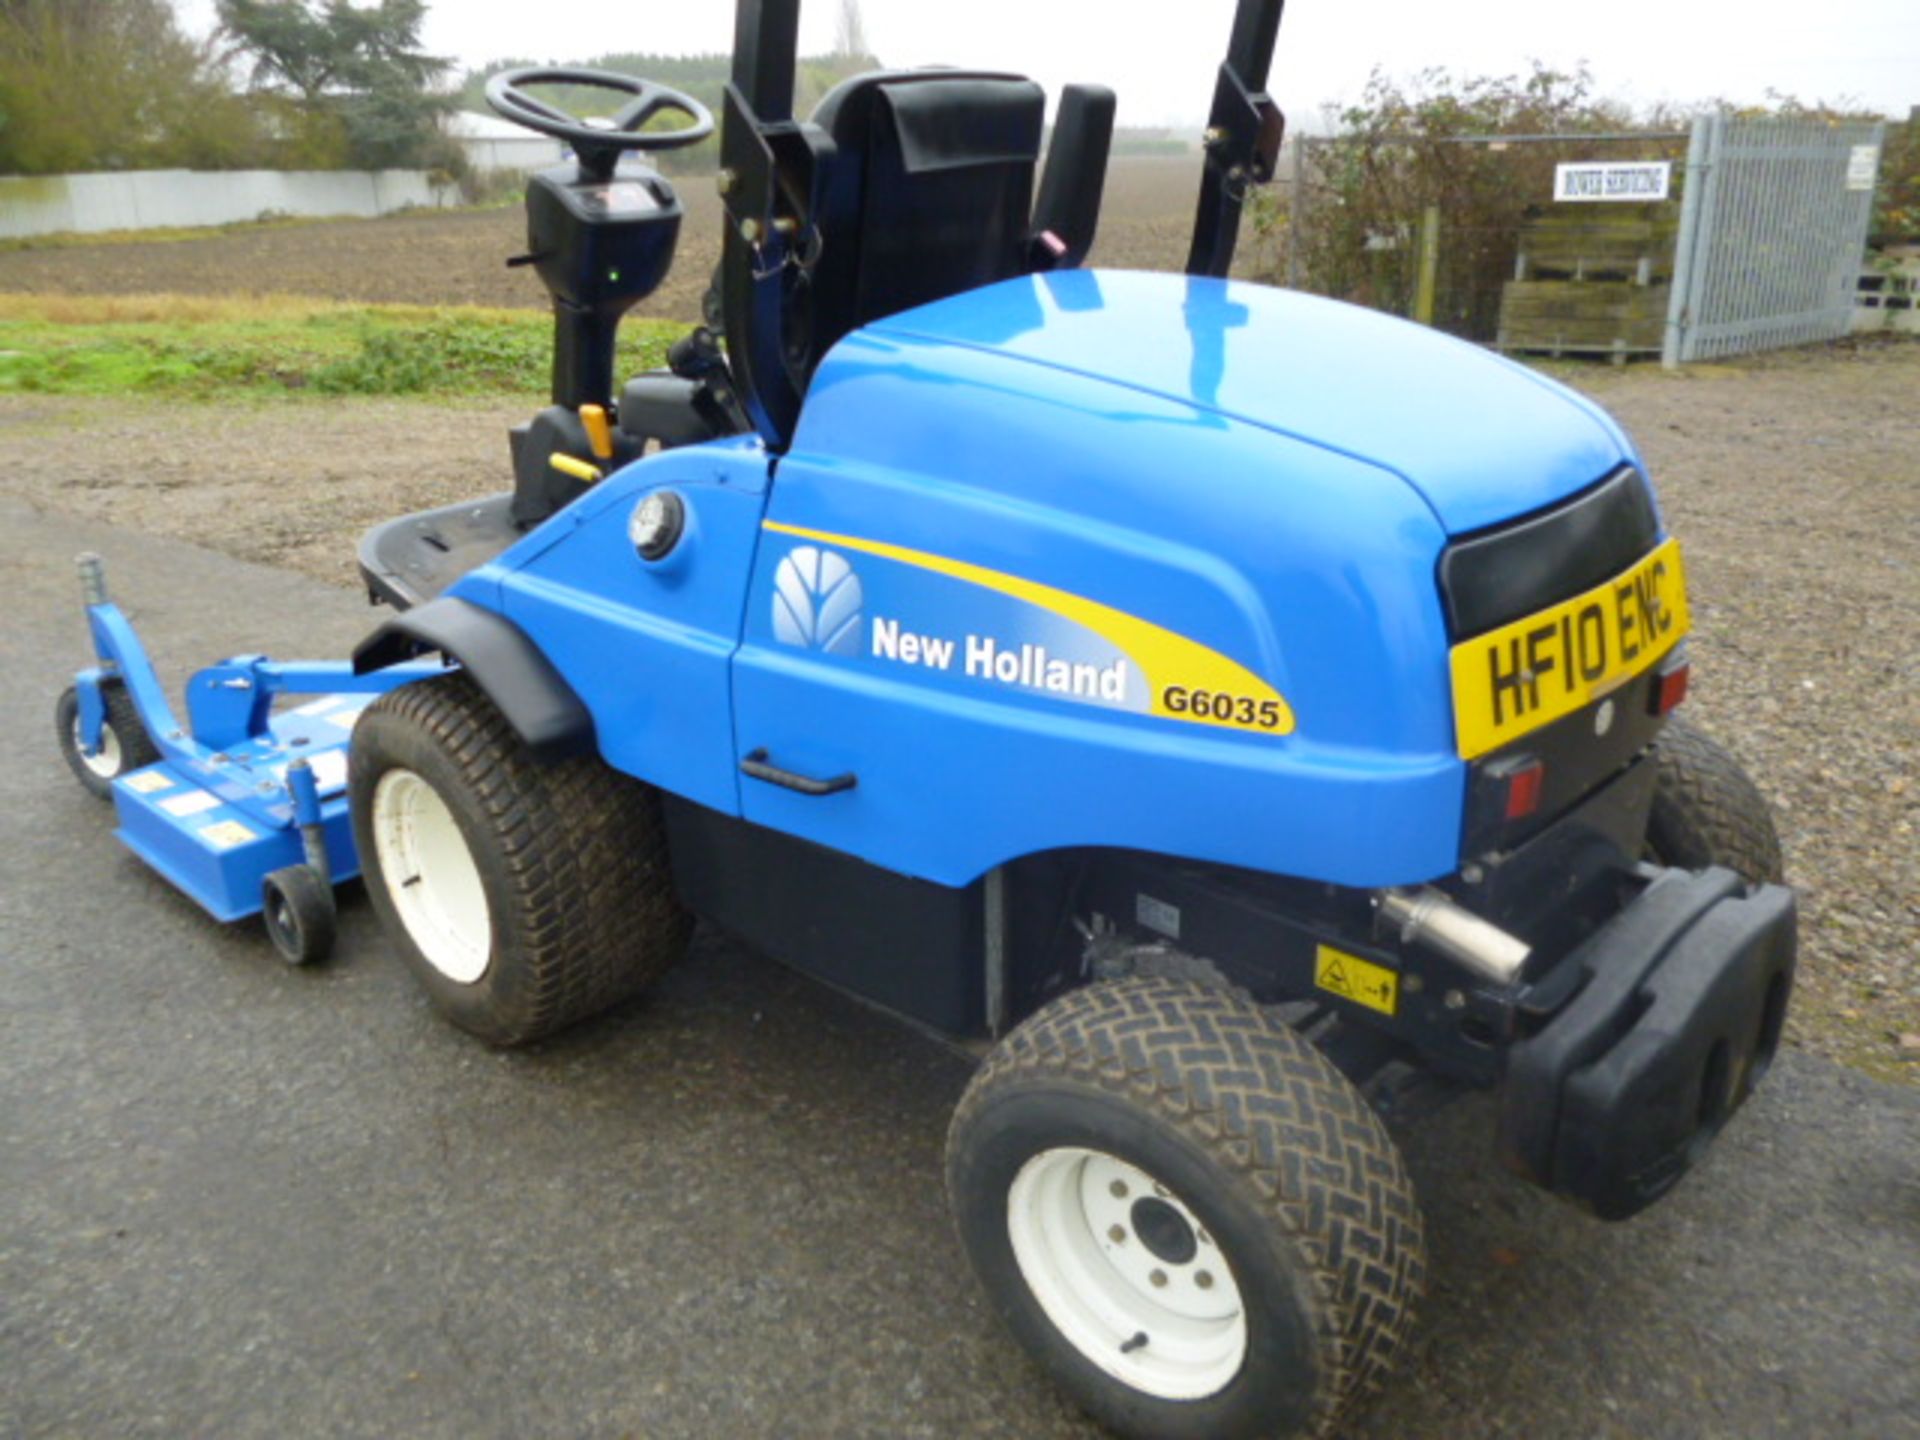 NEW HOLLAND G6035 OUTFRONT RIDE ON MOWER - Image 4 of 5